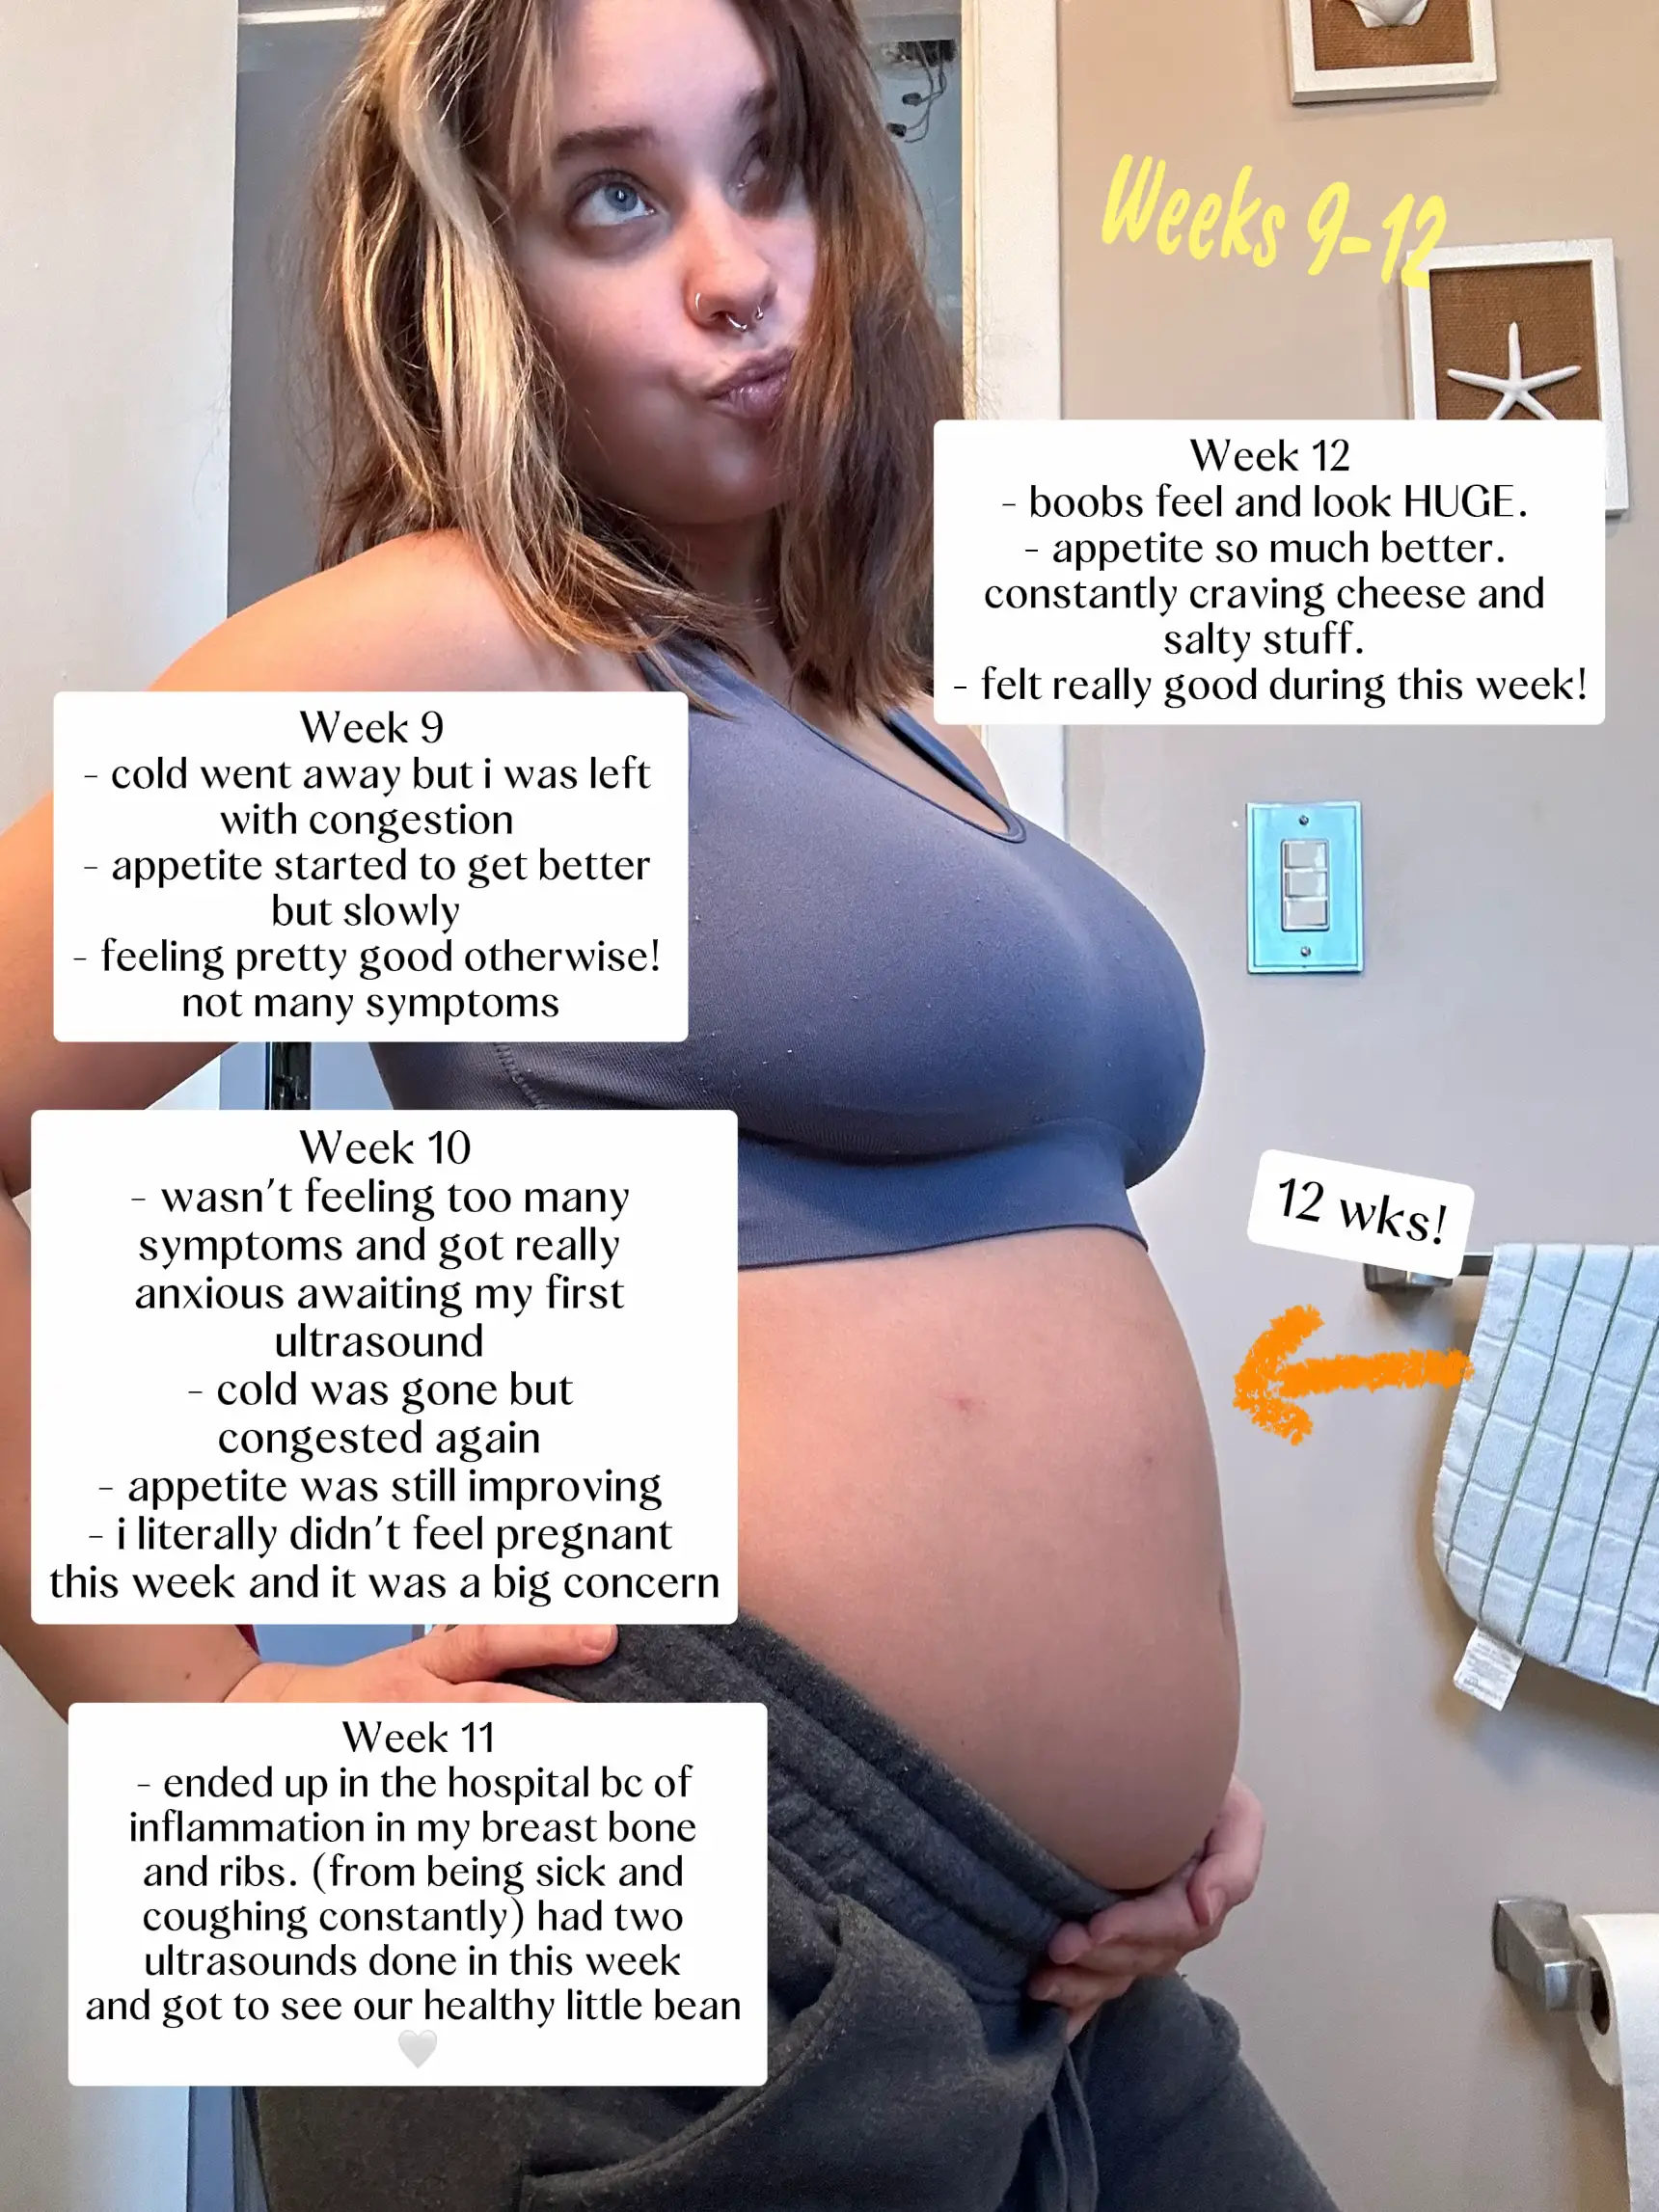 Skims try on 17 weeks pregnant, Video published by Krystiana